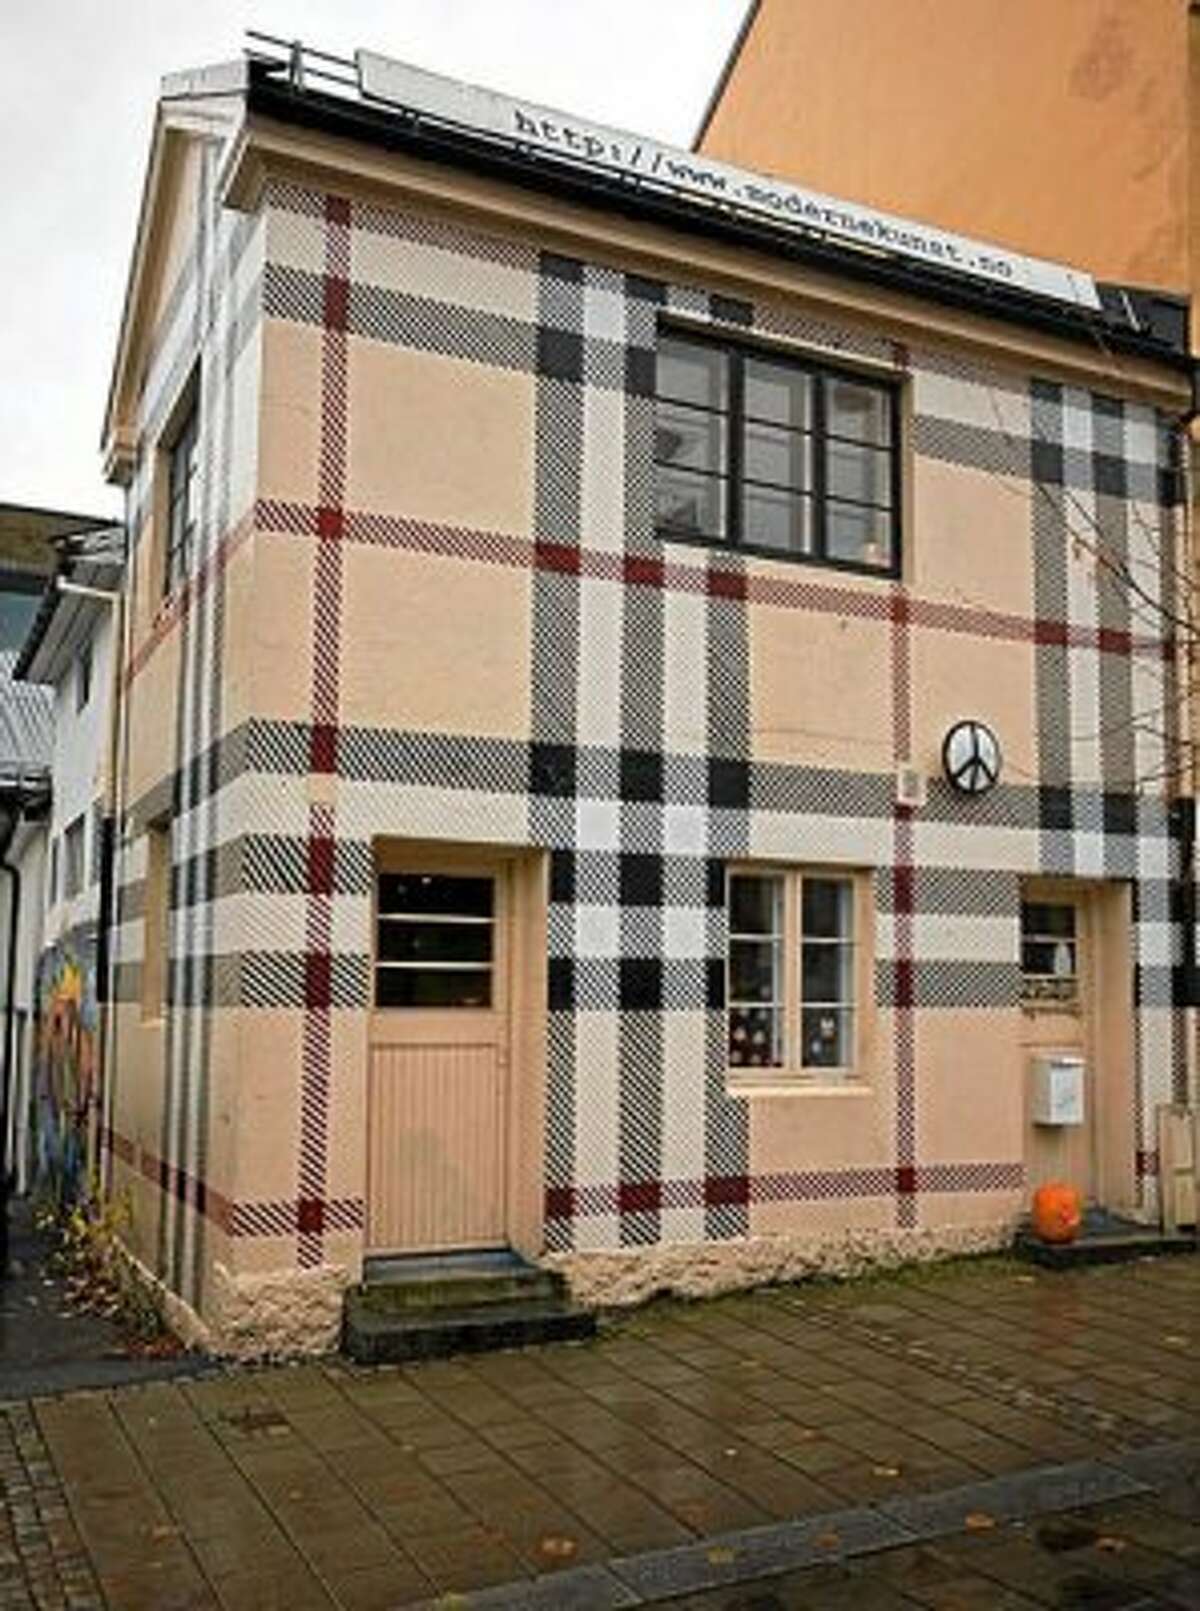 Burberry fashionista in Norway (Curbed.com / http://curbed.com/)